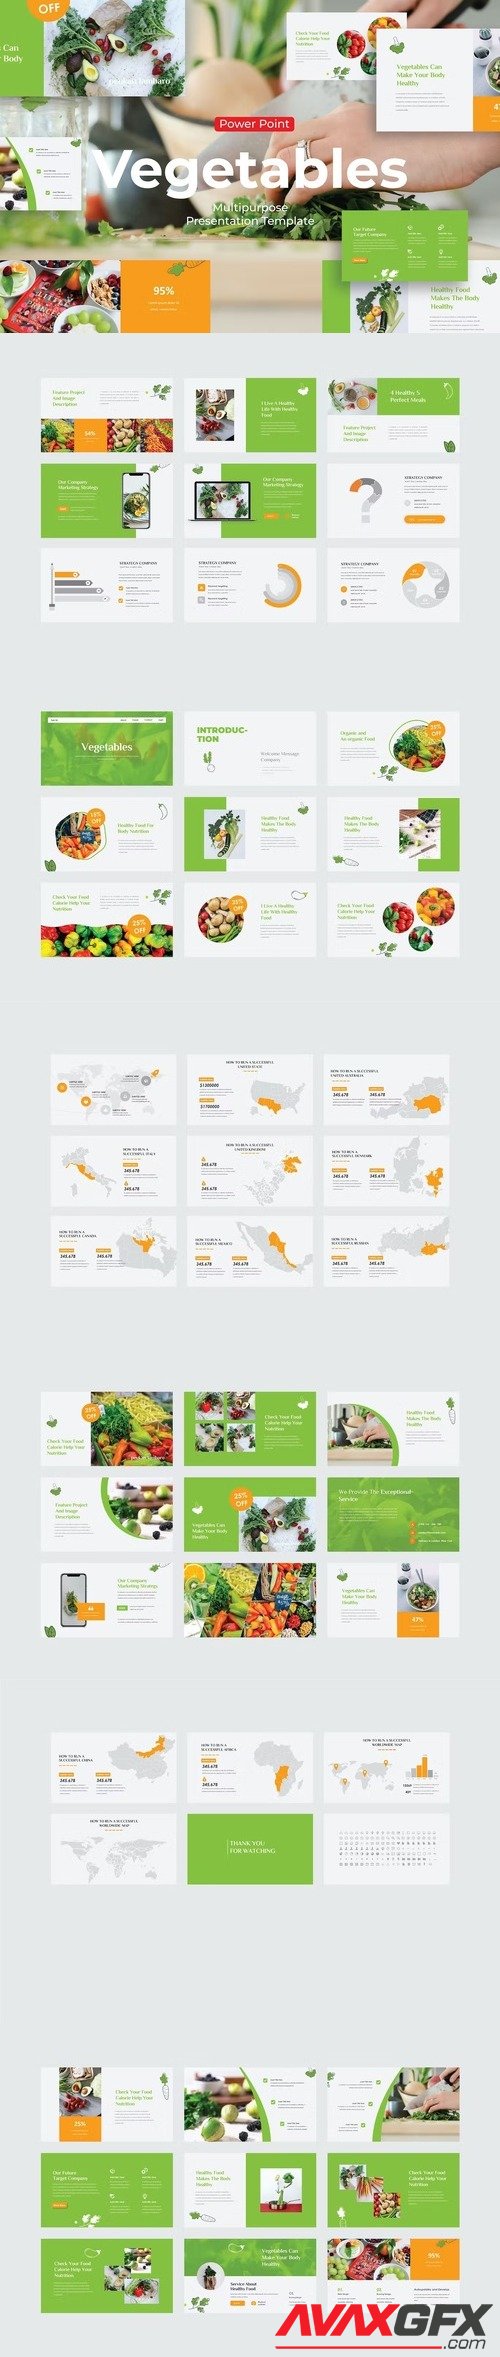 Vegetables - PowerPoint Template